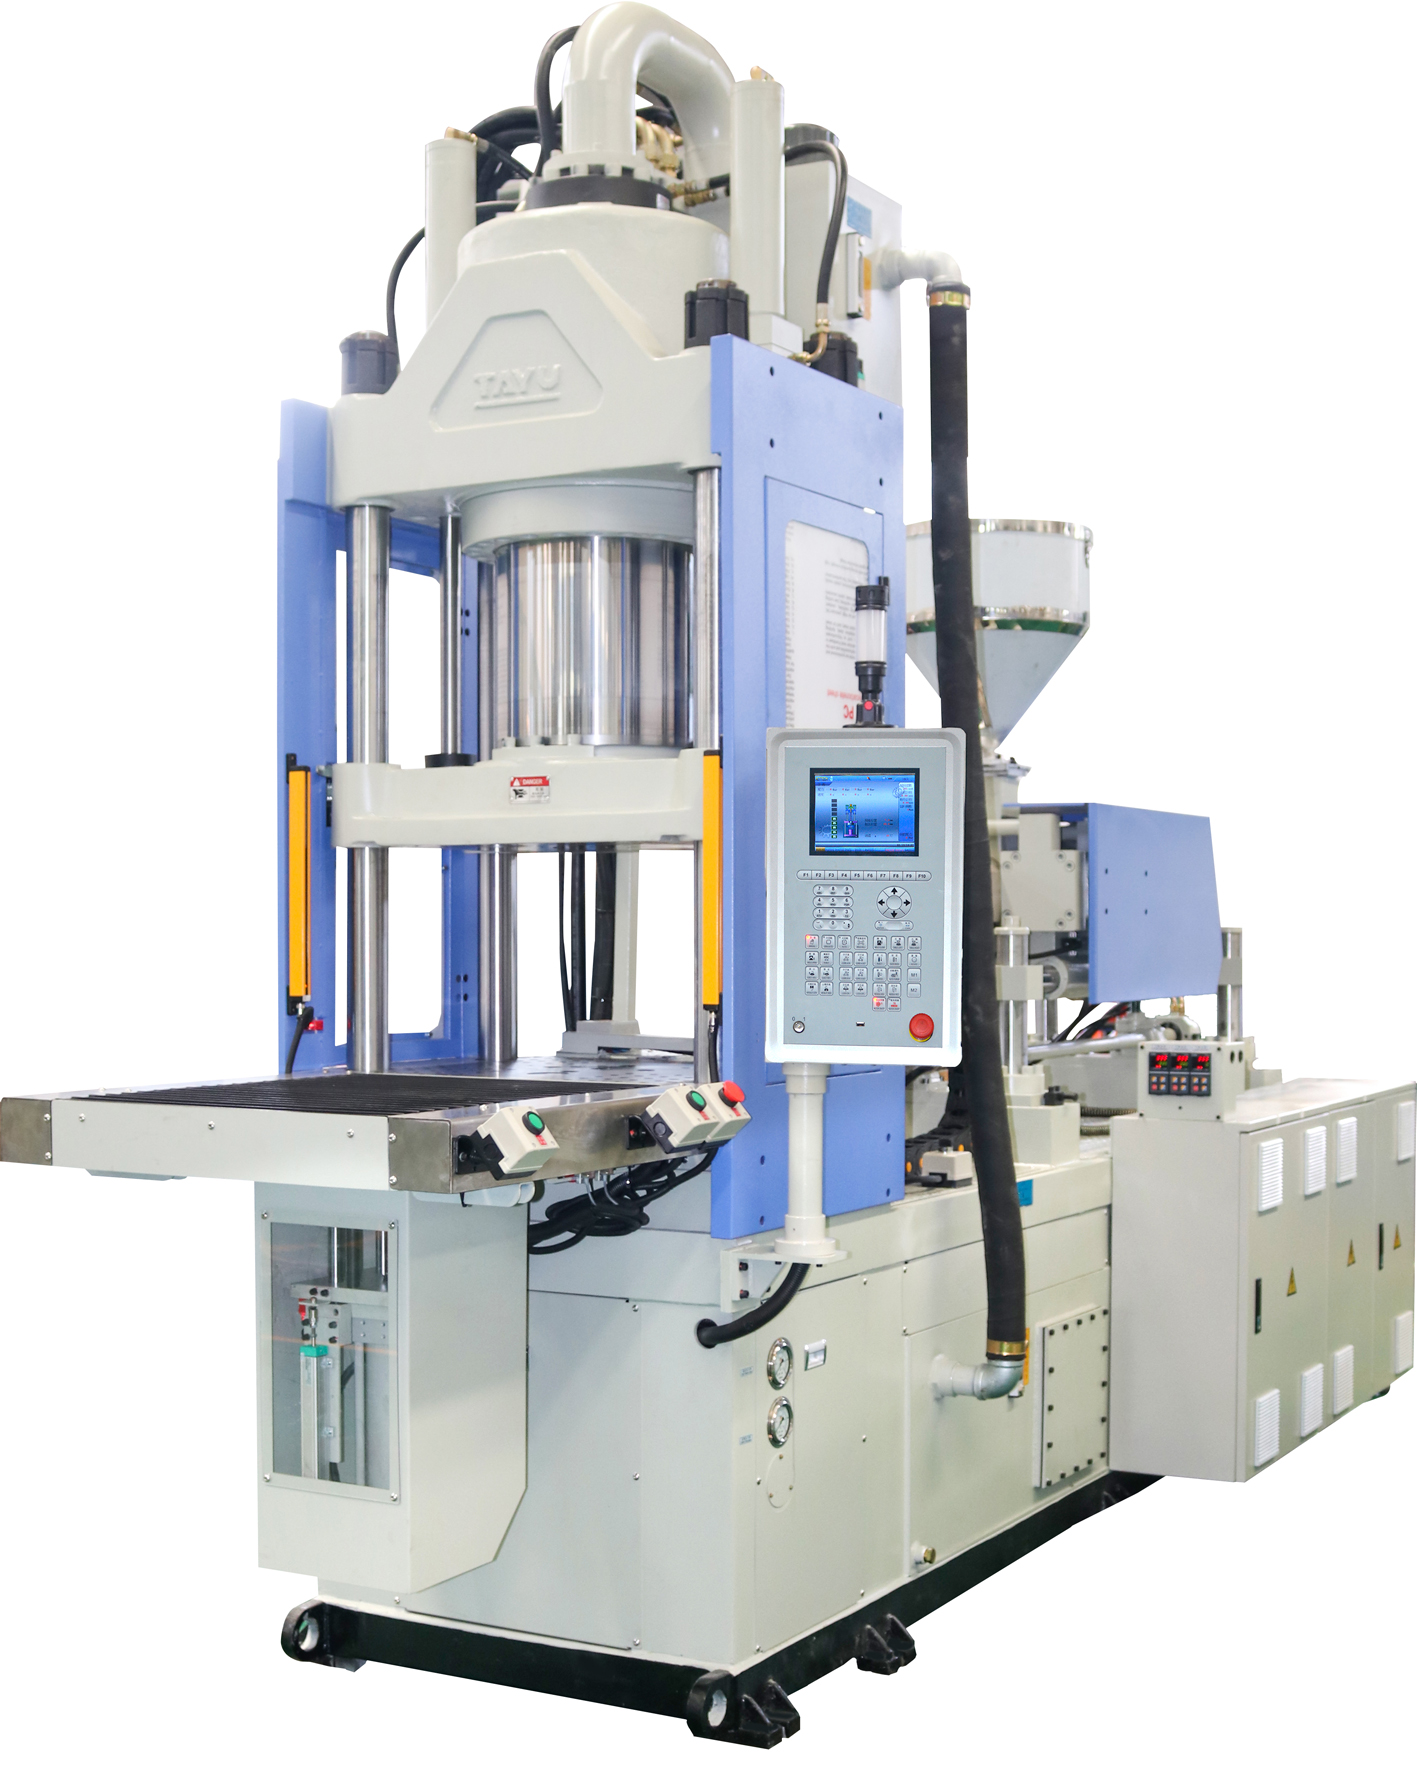 TK-1200S vertical injection molding machine